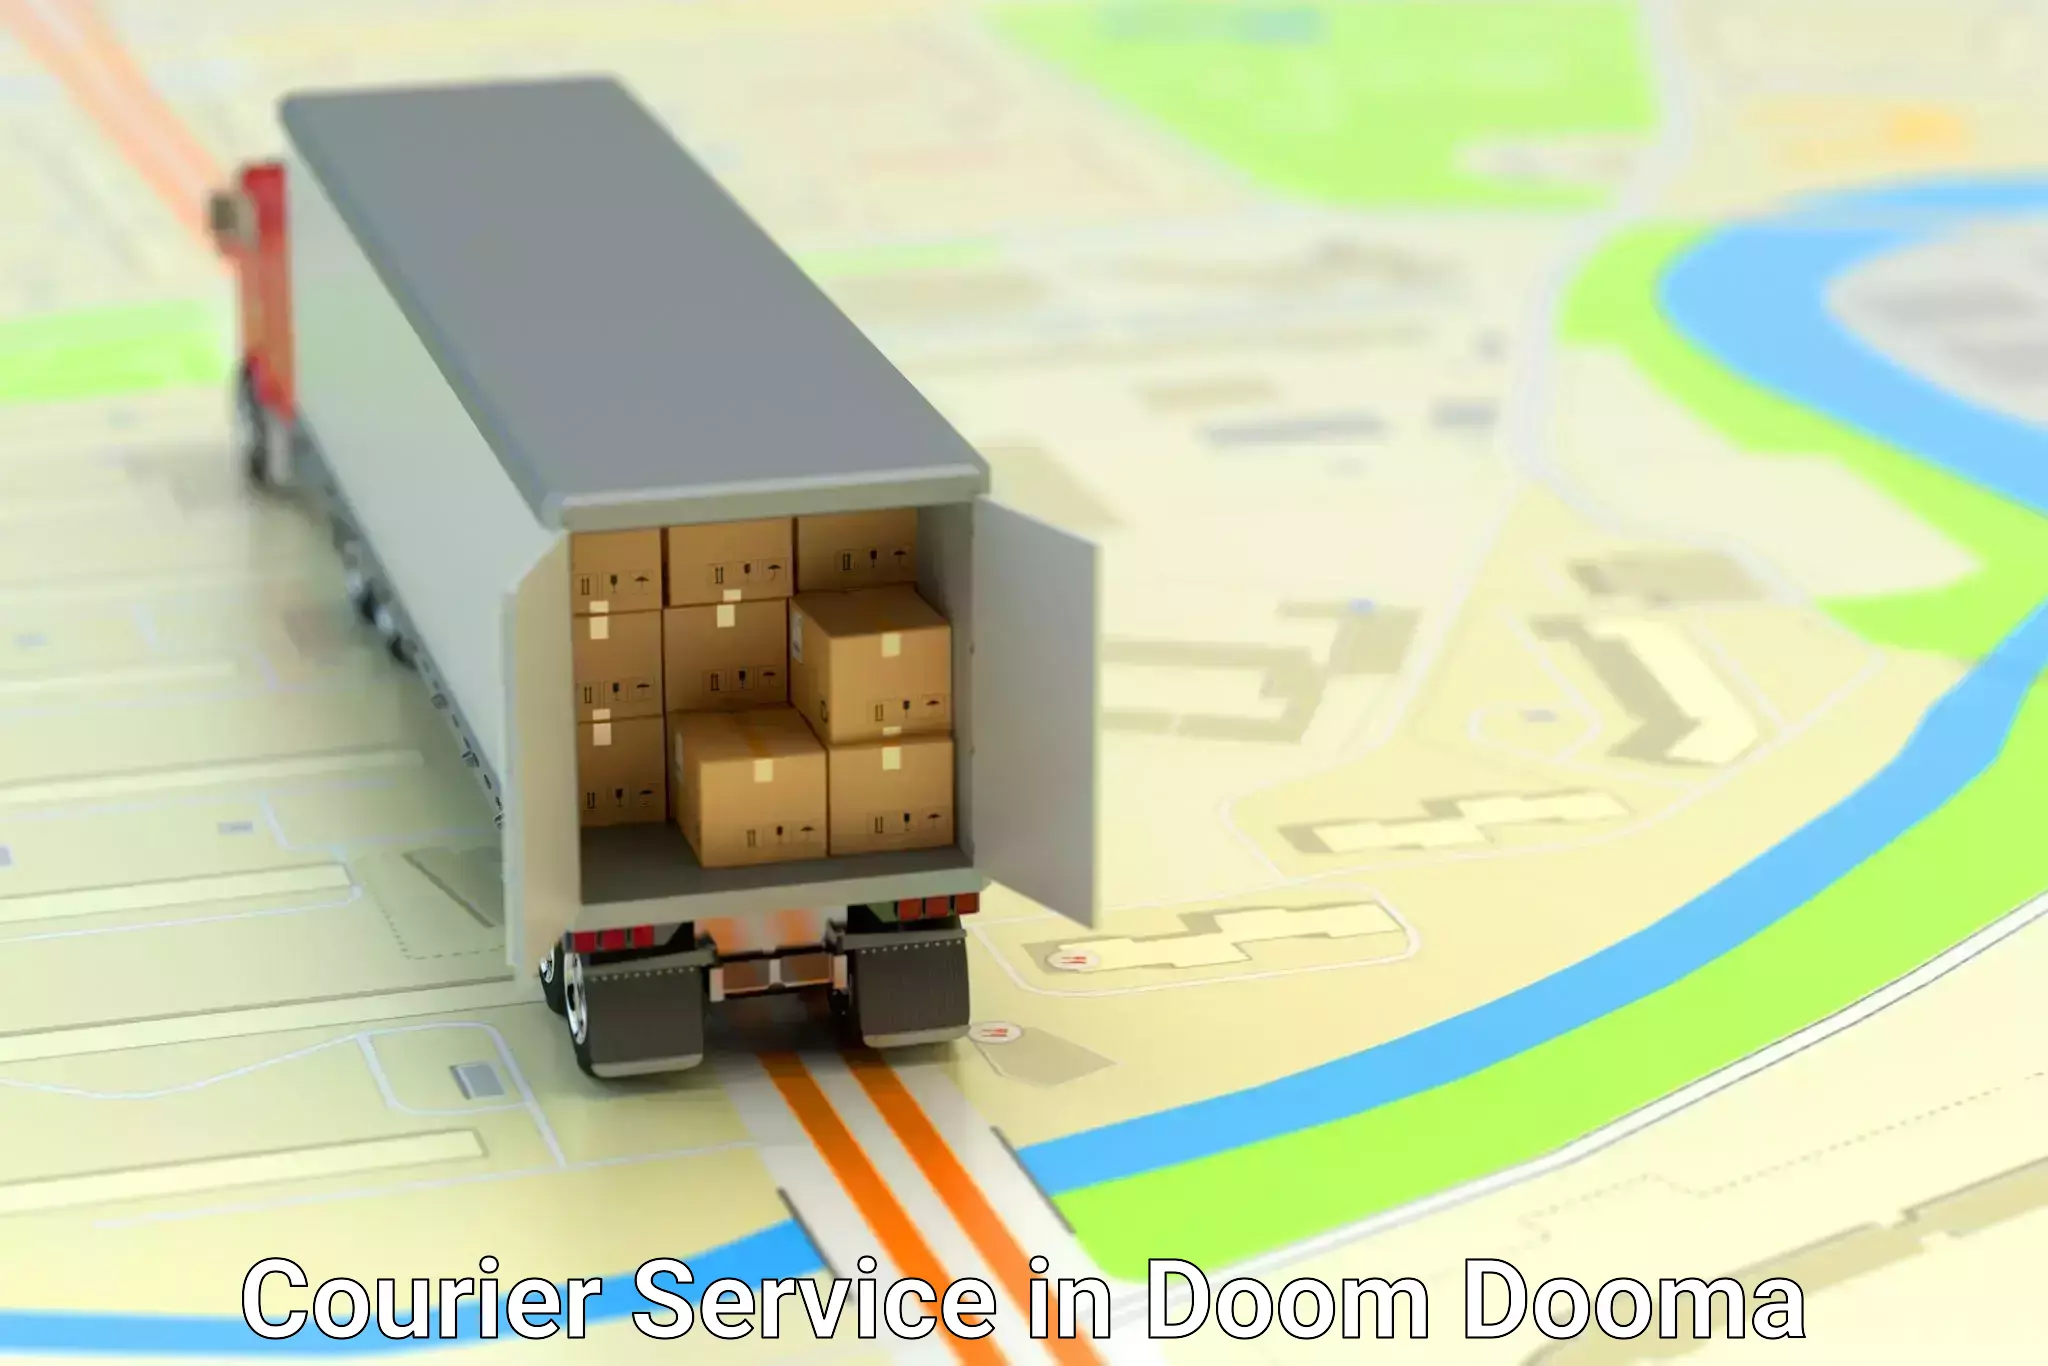 Parcel handling and care in Doom Dooma